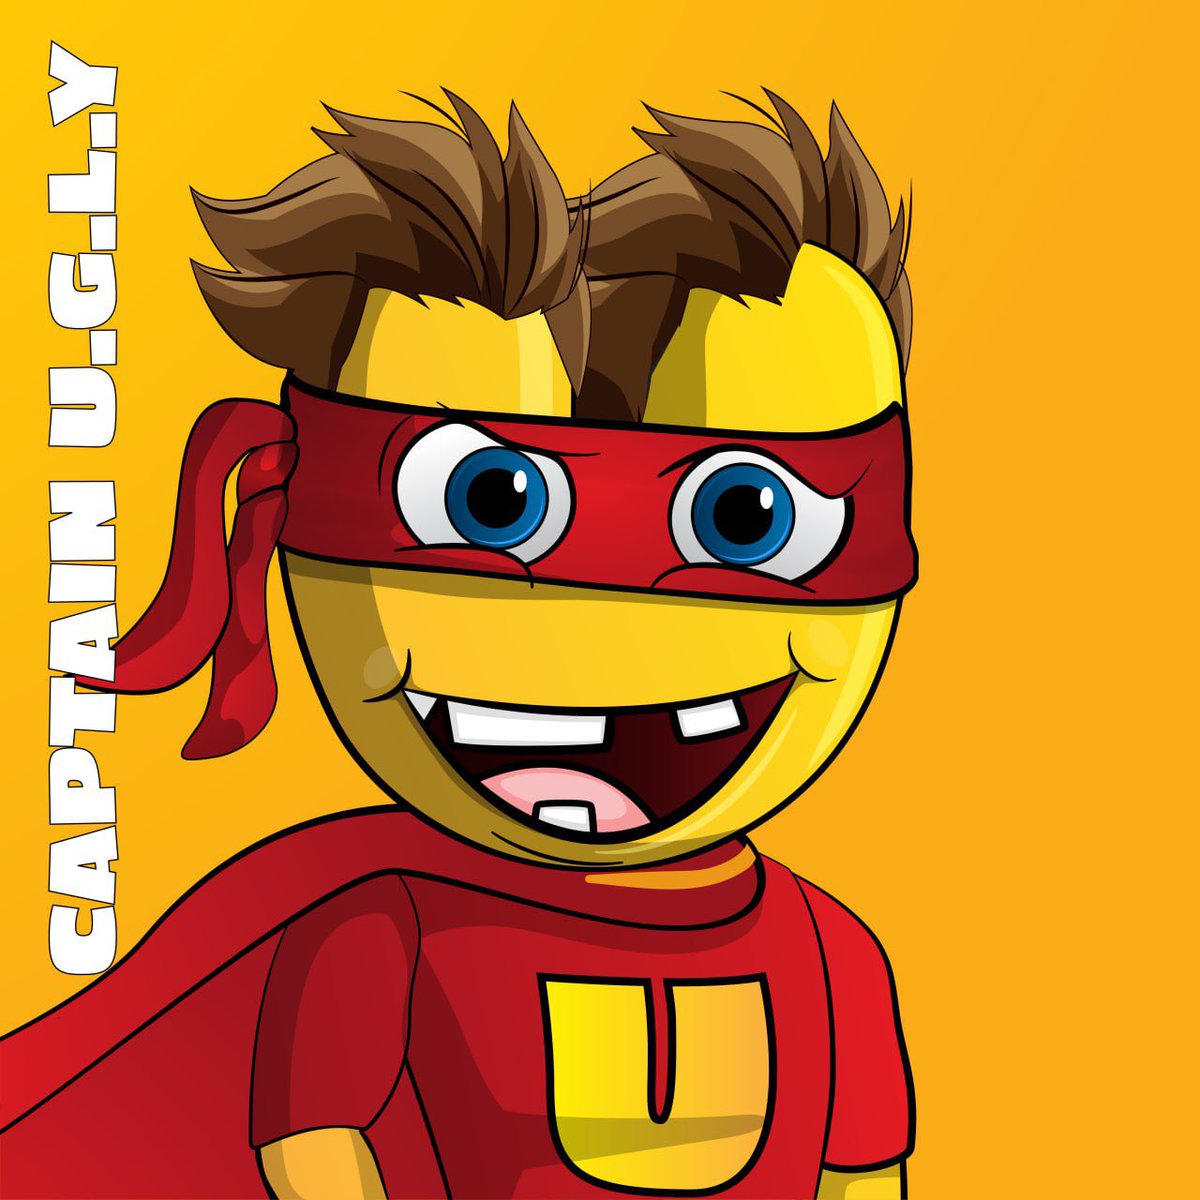 🔜 The countdown begins! The UGLY Hero arrives soon to make a stand against bullying. Will you join the fight? 🛡️ #StandTogether #BeAHero 🦸‍♂️